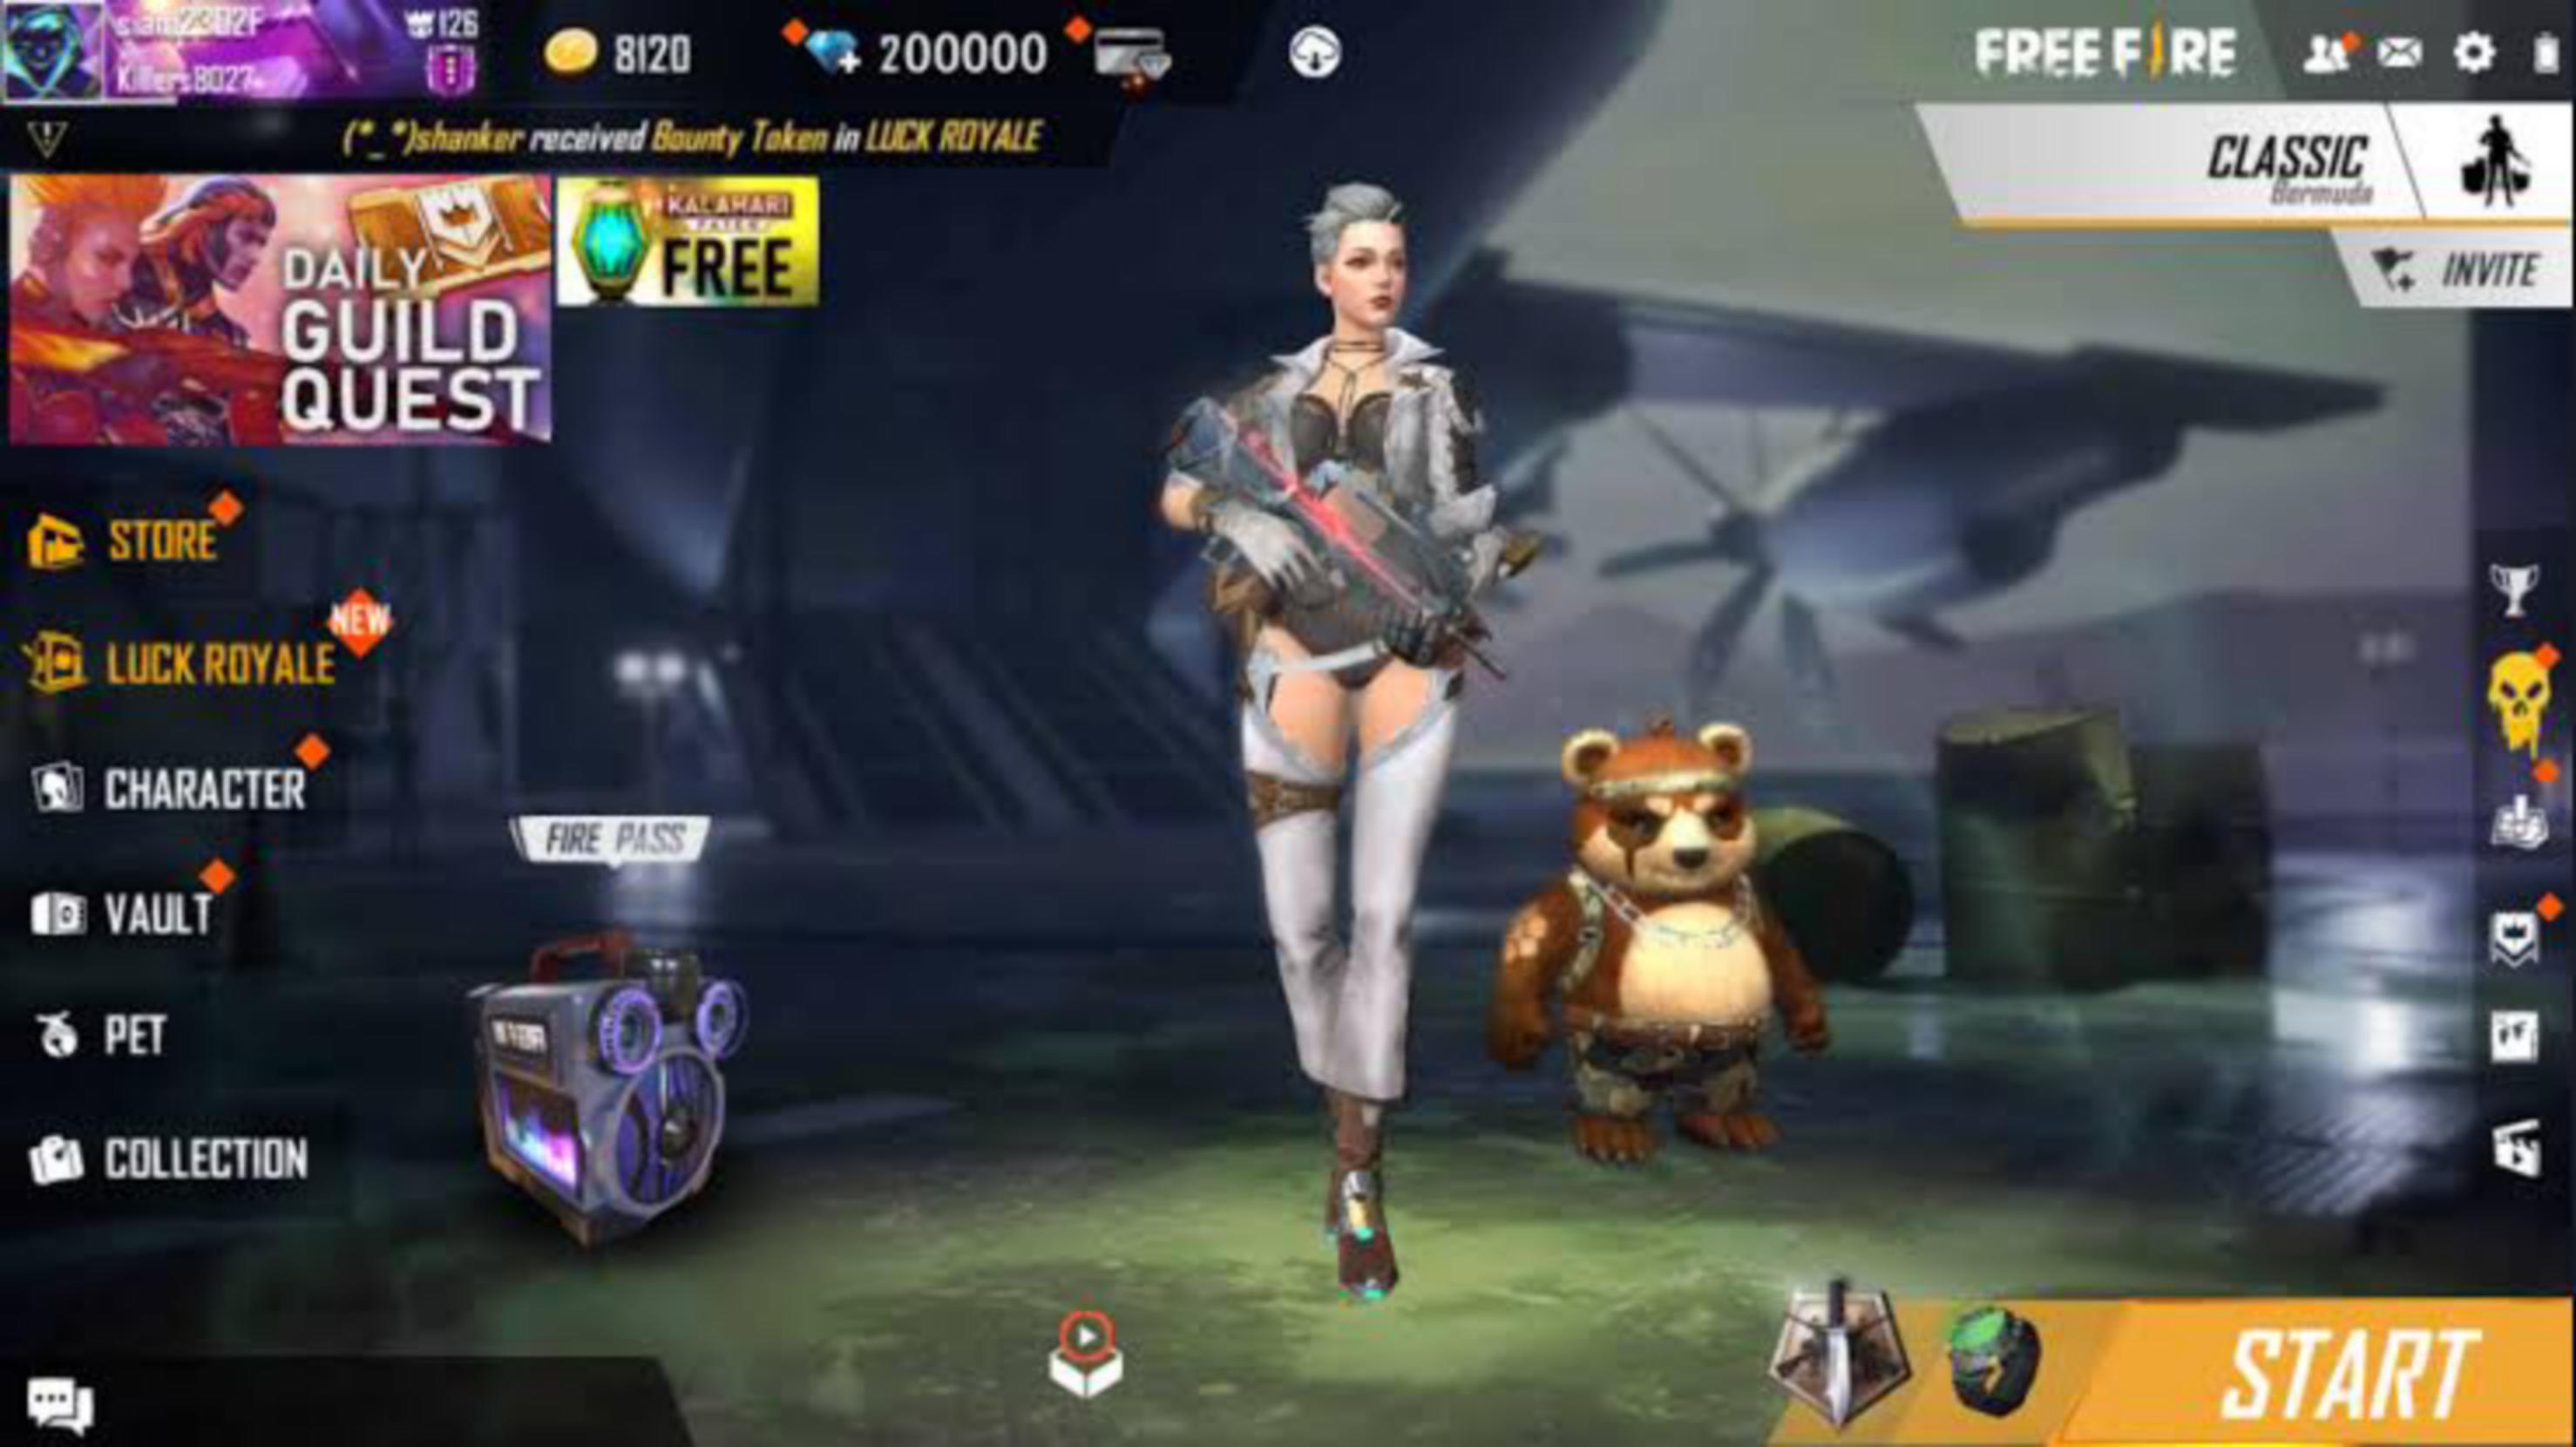 Free Fire Unlimited Diamonds 9999 For Android Apk Download